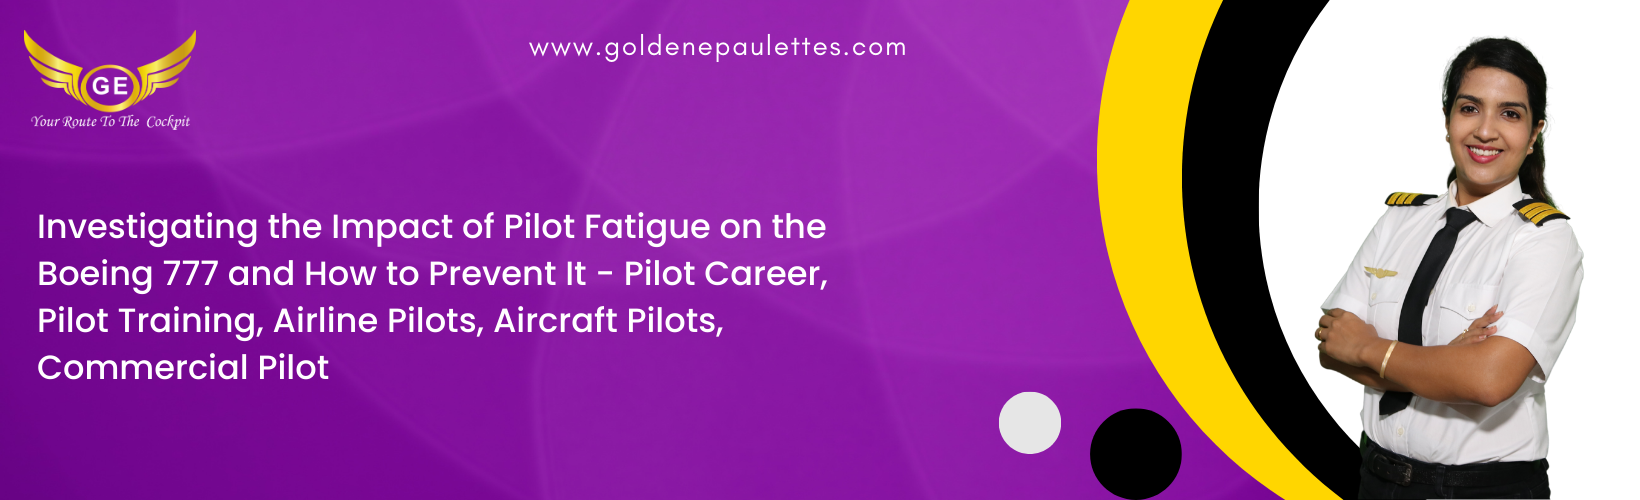 The Boeing 777 and Pilot Fatigue